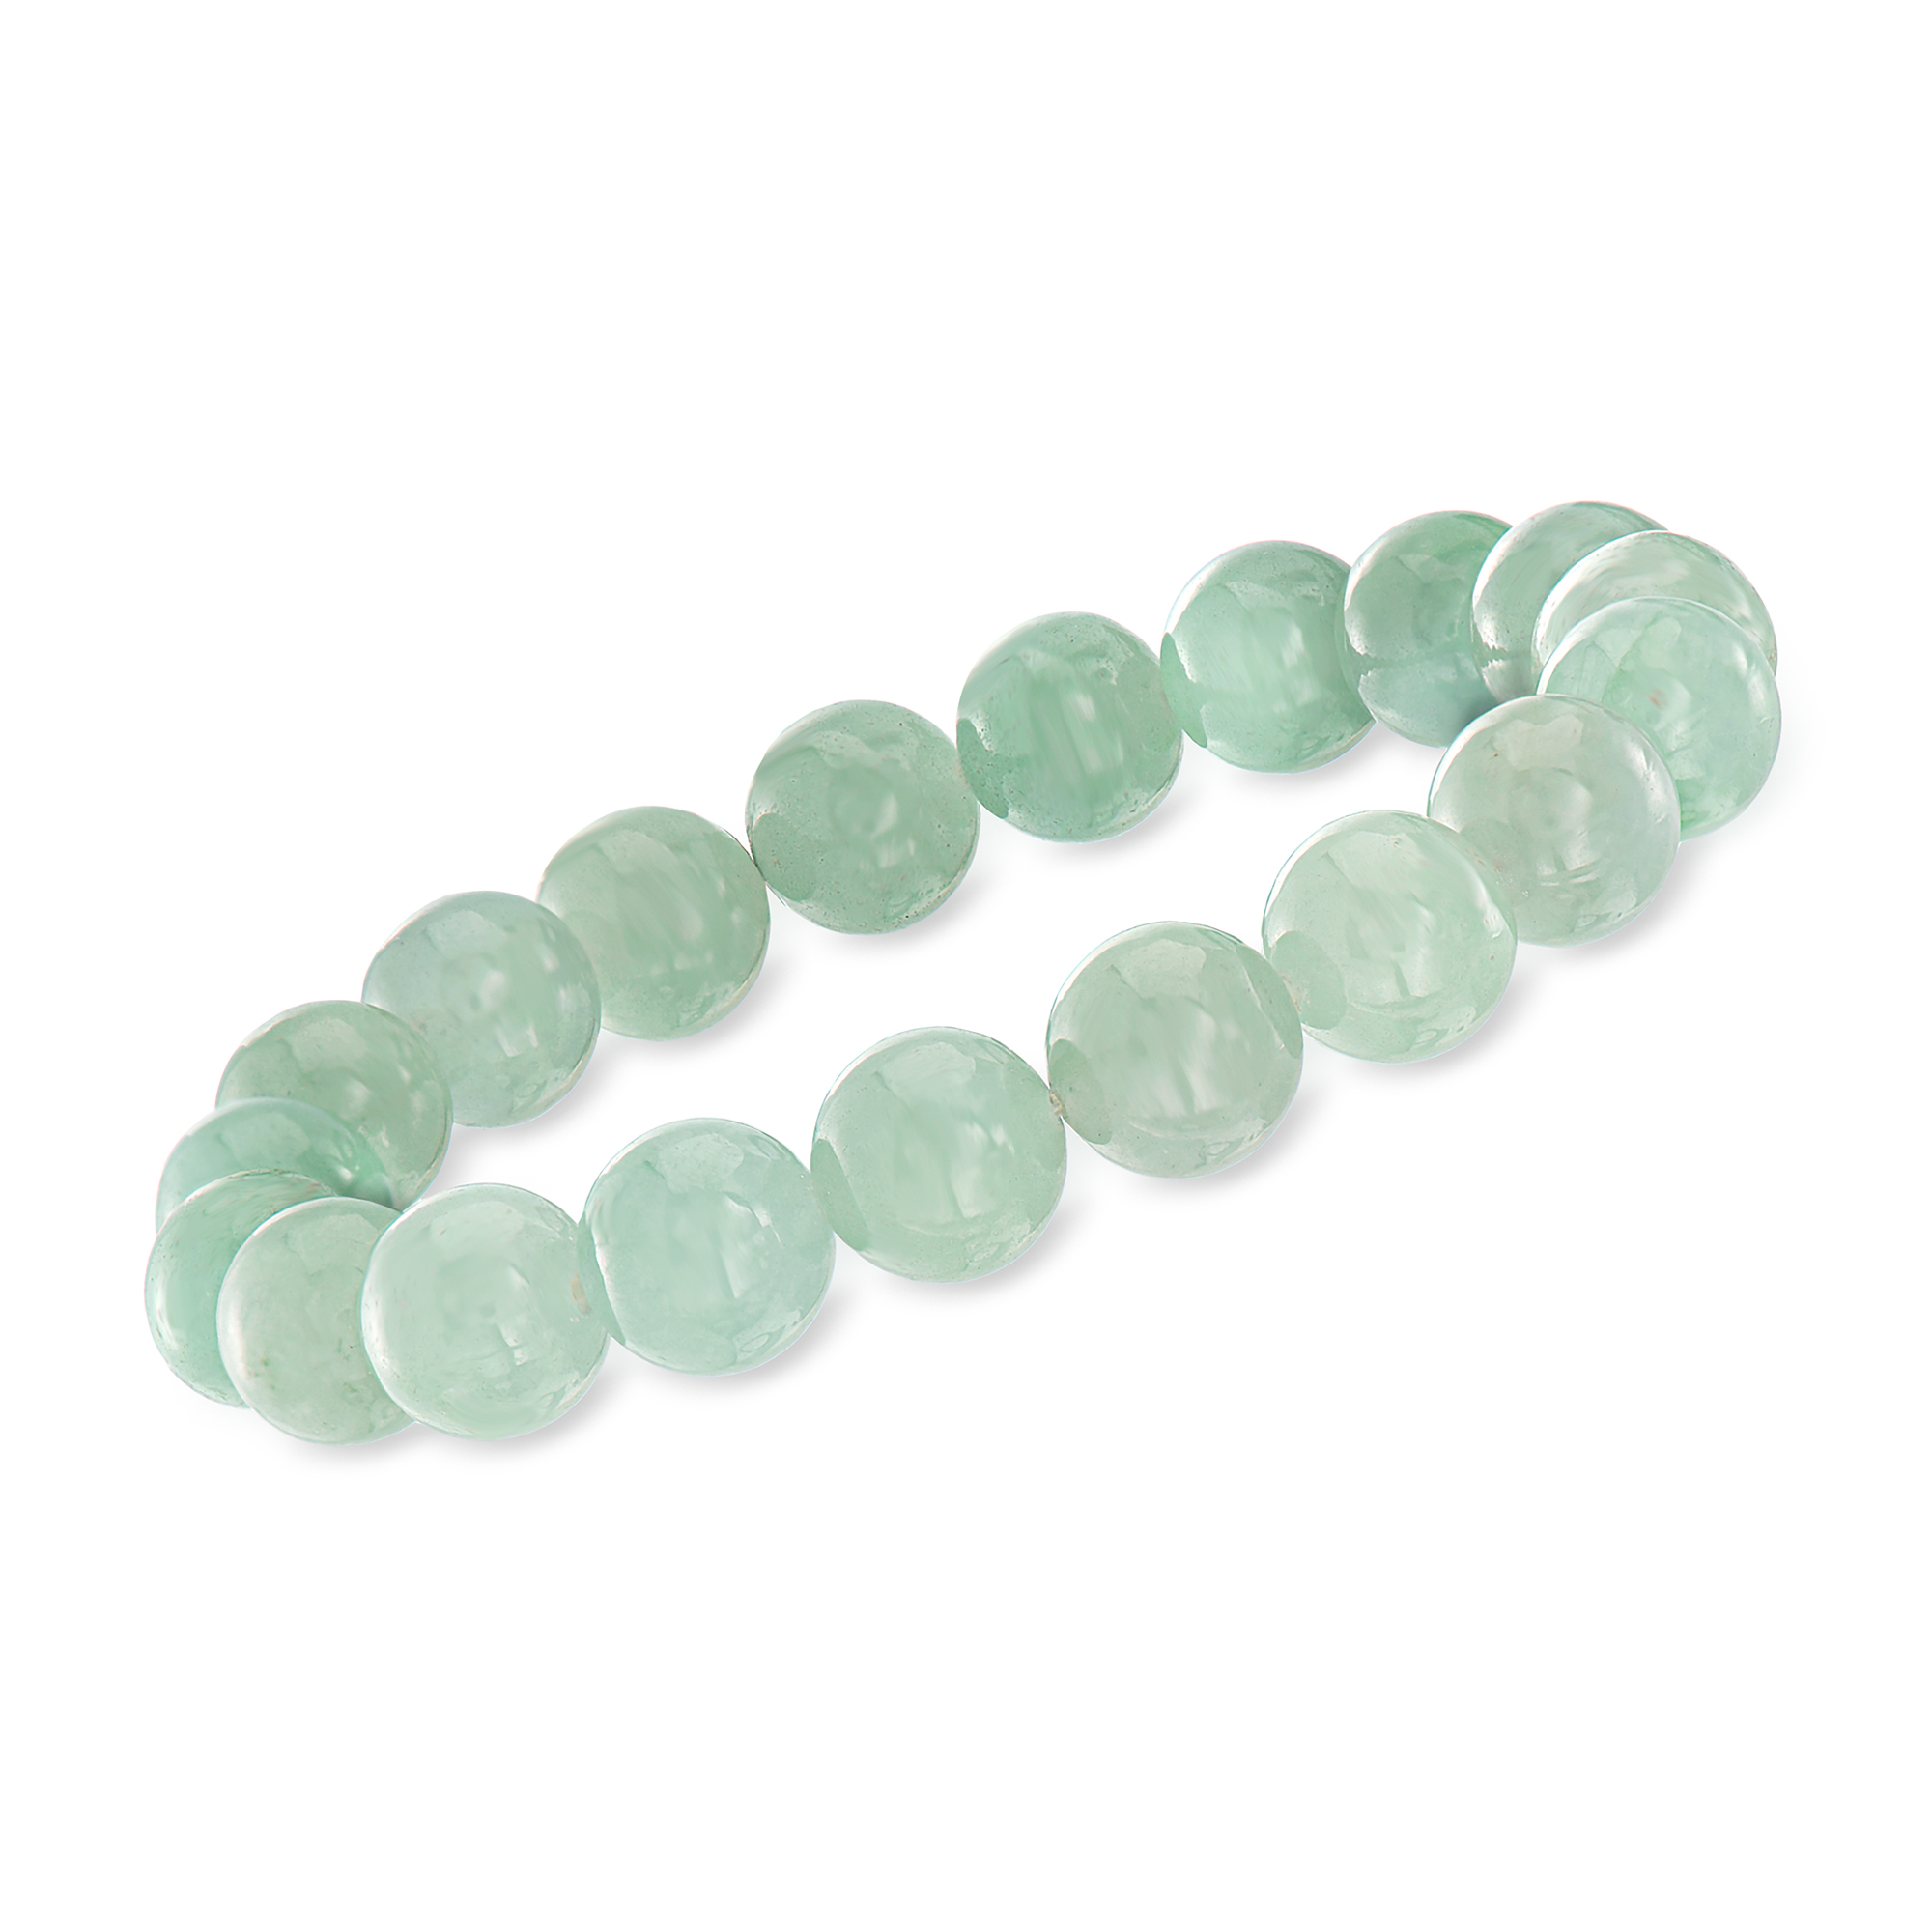 Made in USA Energy and Clarity FORZIANI 8mm Green Jade Bead Bracelet Men Women High Quality Natural Green Gemstone Beaded Stretch Unisex Bracelet Adjustable Size